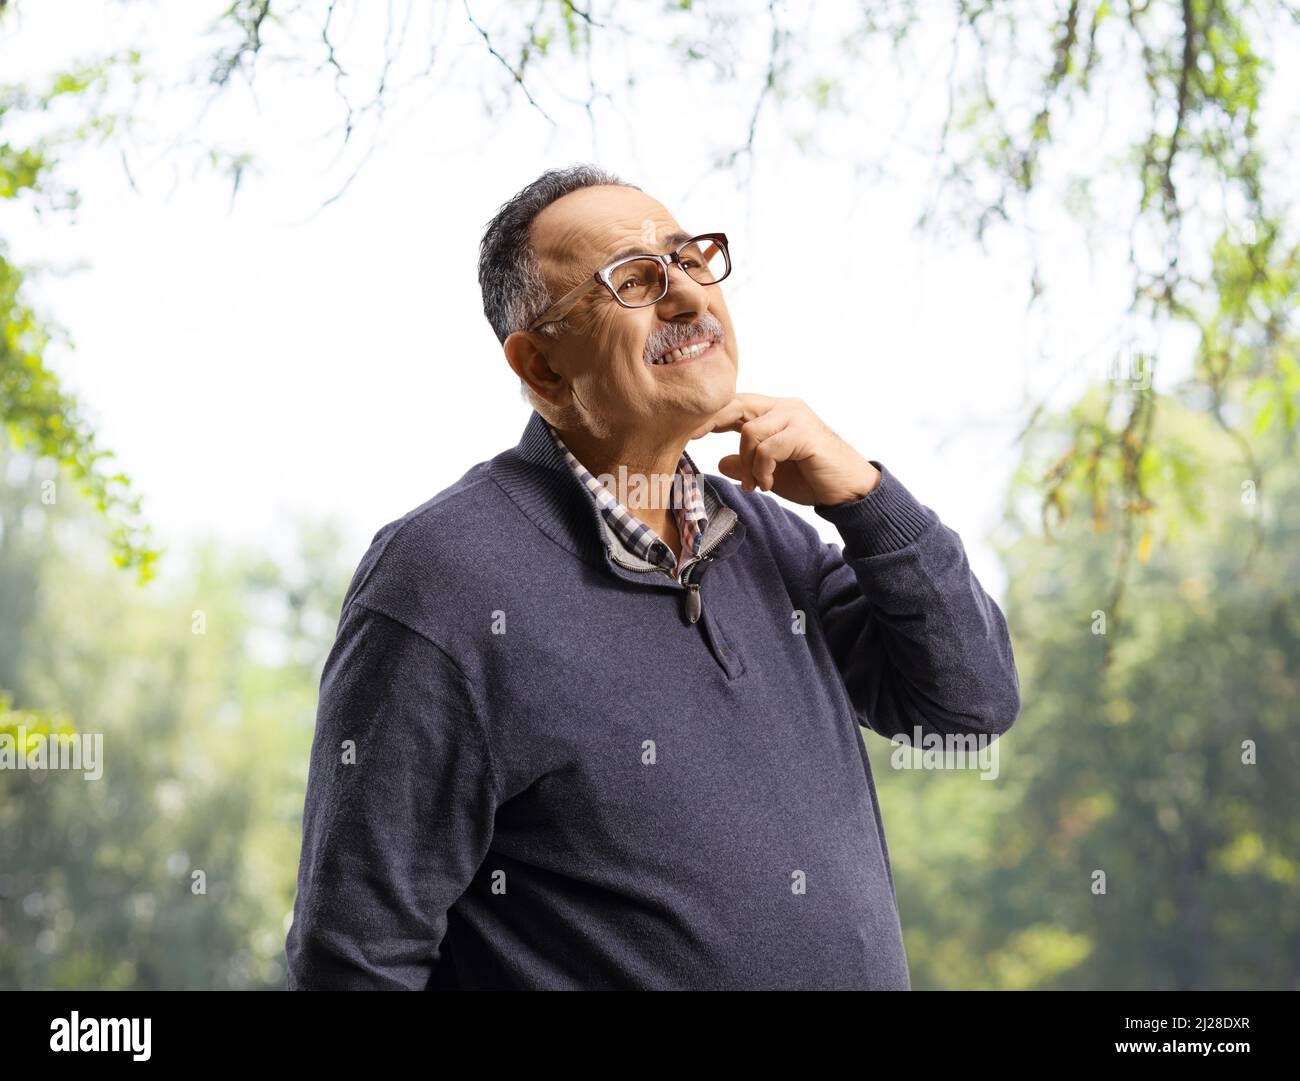 Mature man itching his neck outdoors in a park Stock Photo